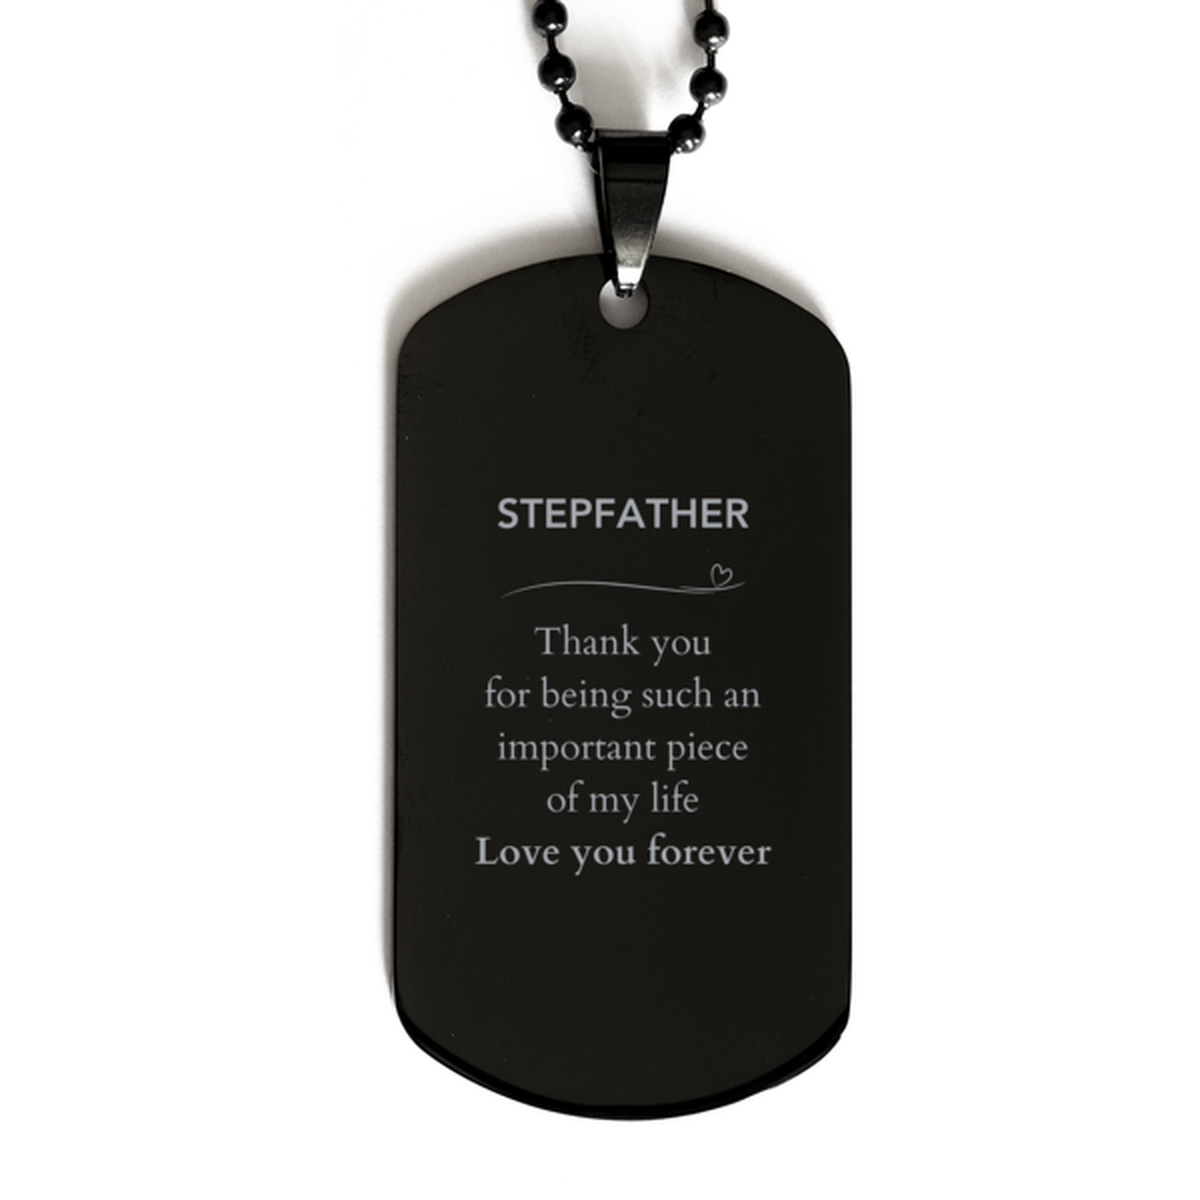 Appropriate Stepfather Black Dog Tag Epic Birthday Gifts for Stepfather Thank you for being such an important piece of my life Stepfather Christmas Mothers Fathers Day